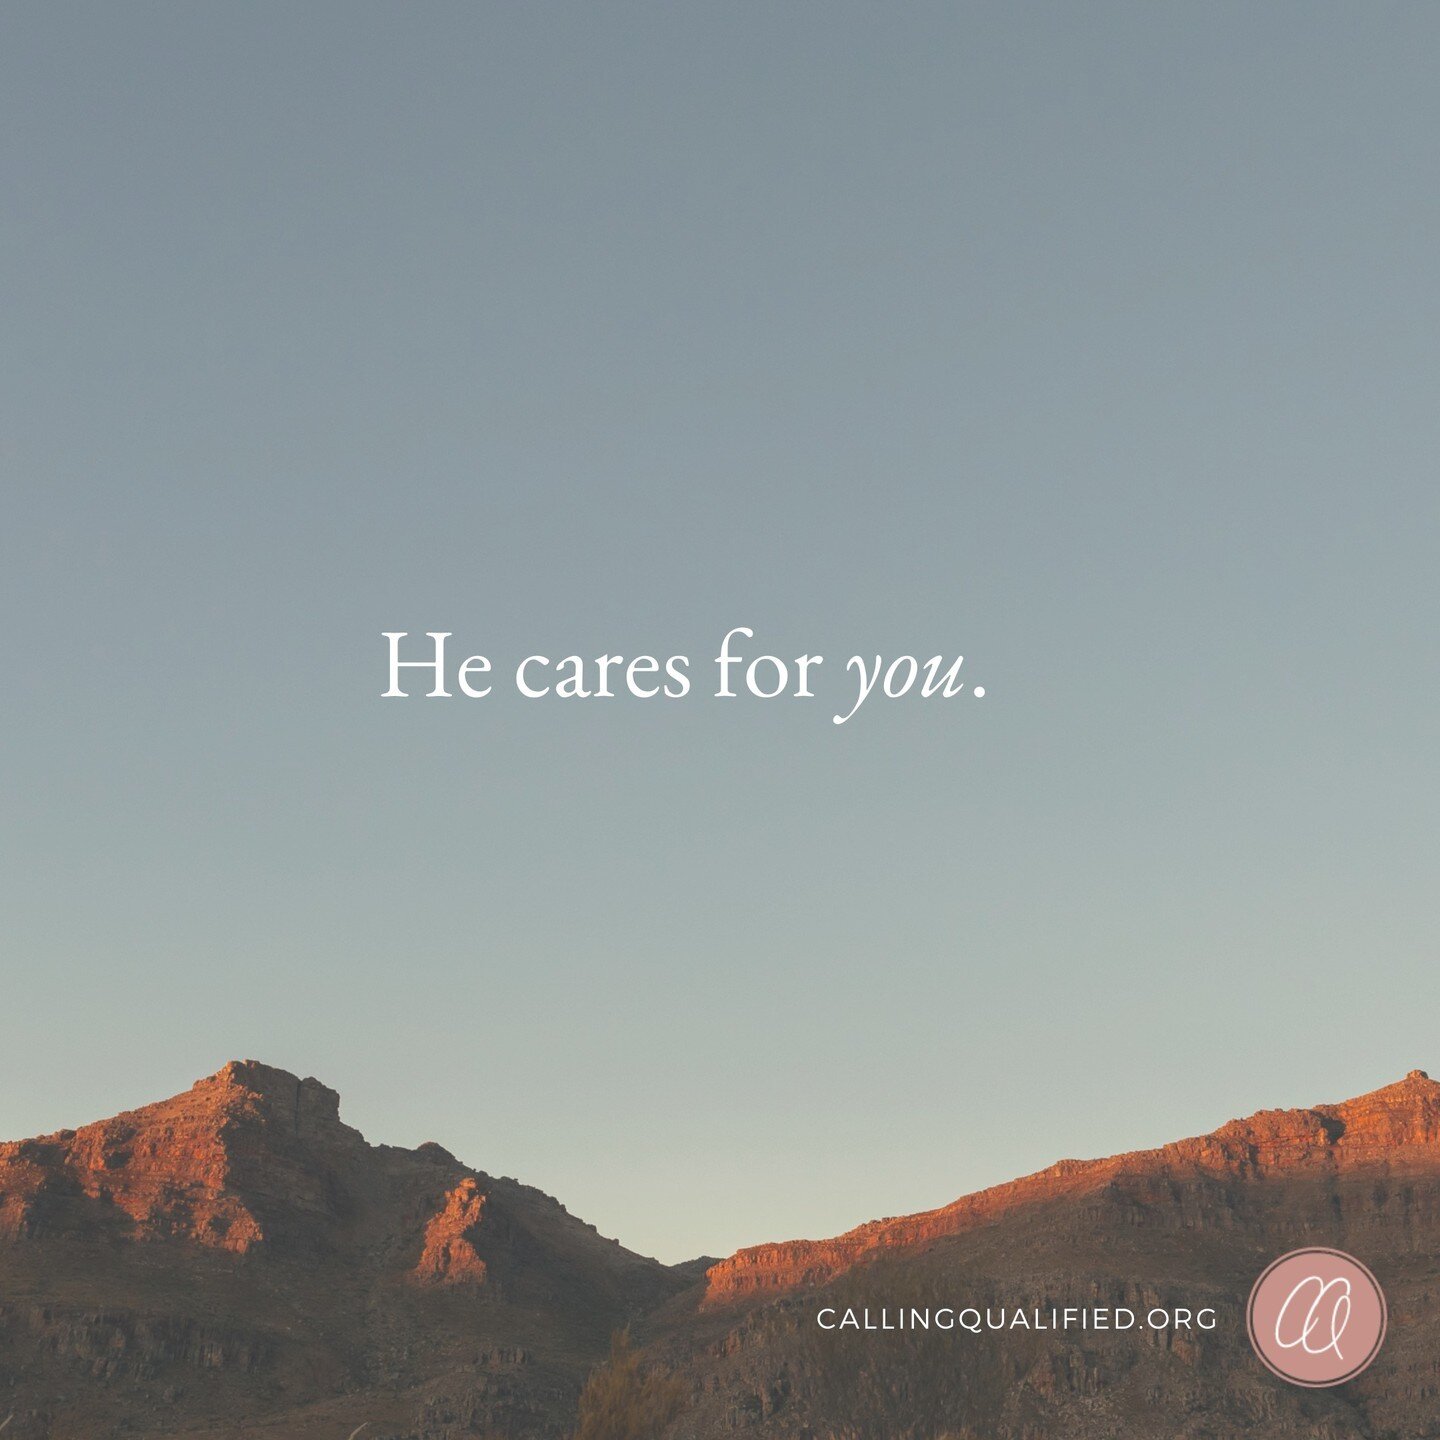 He cares for you. You need that reminder as much as you remind others of this truth. He cares for you. 

#reminder #godcares #callingqualified